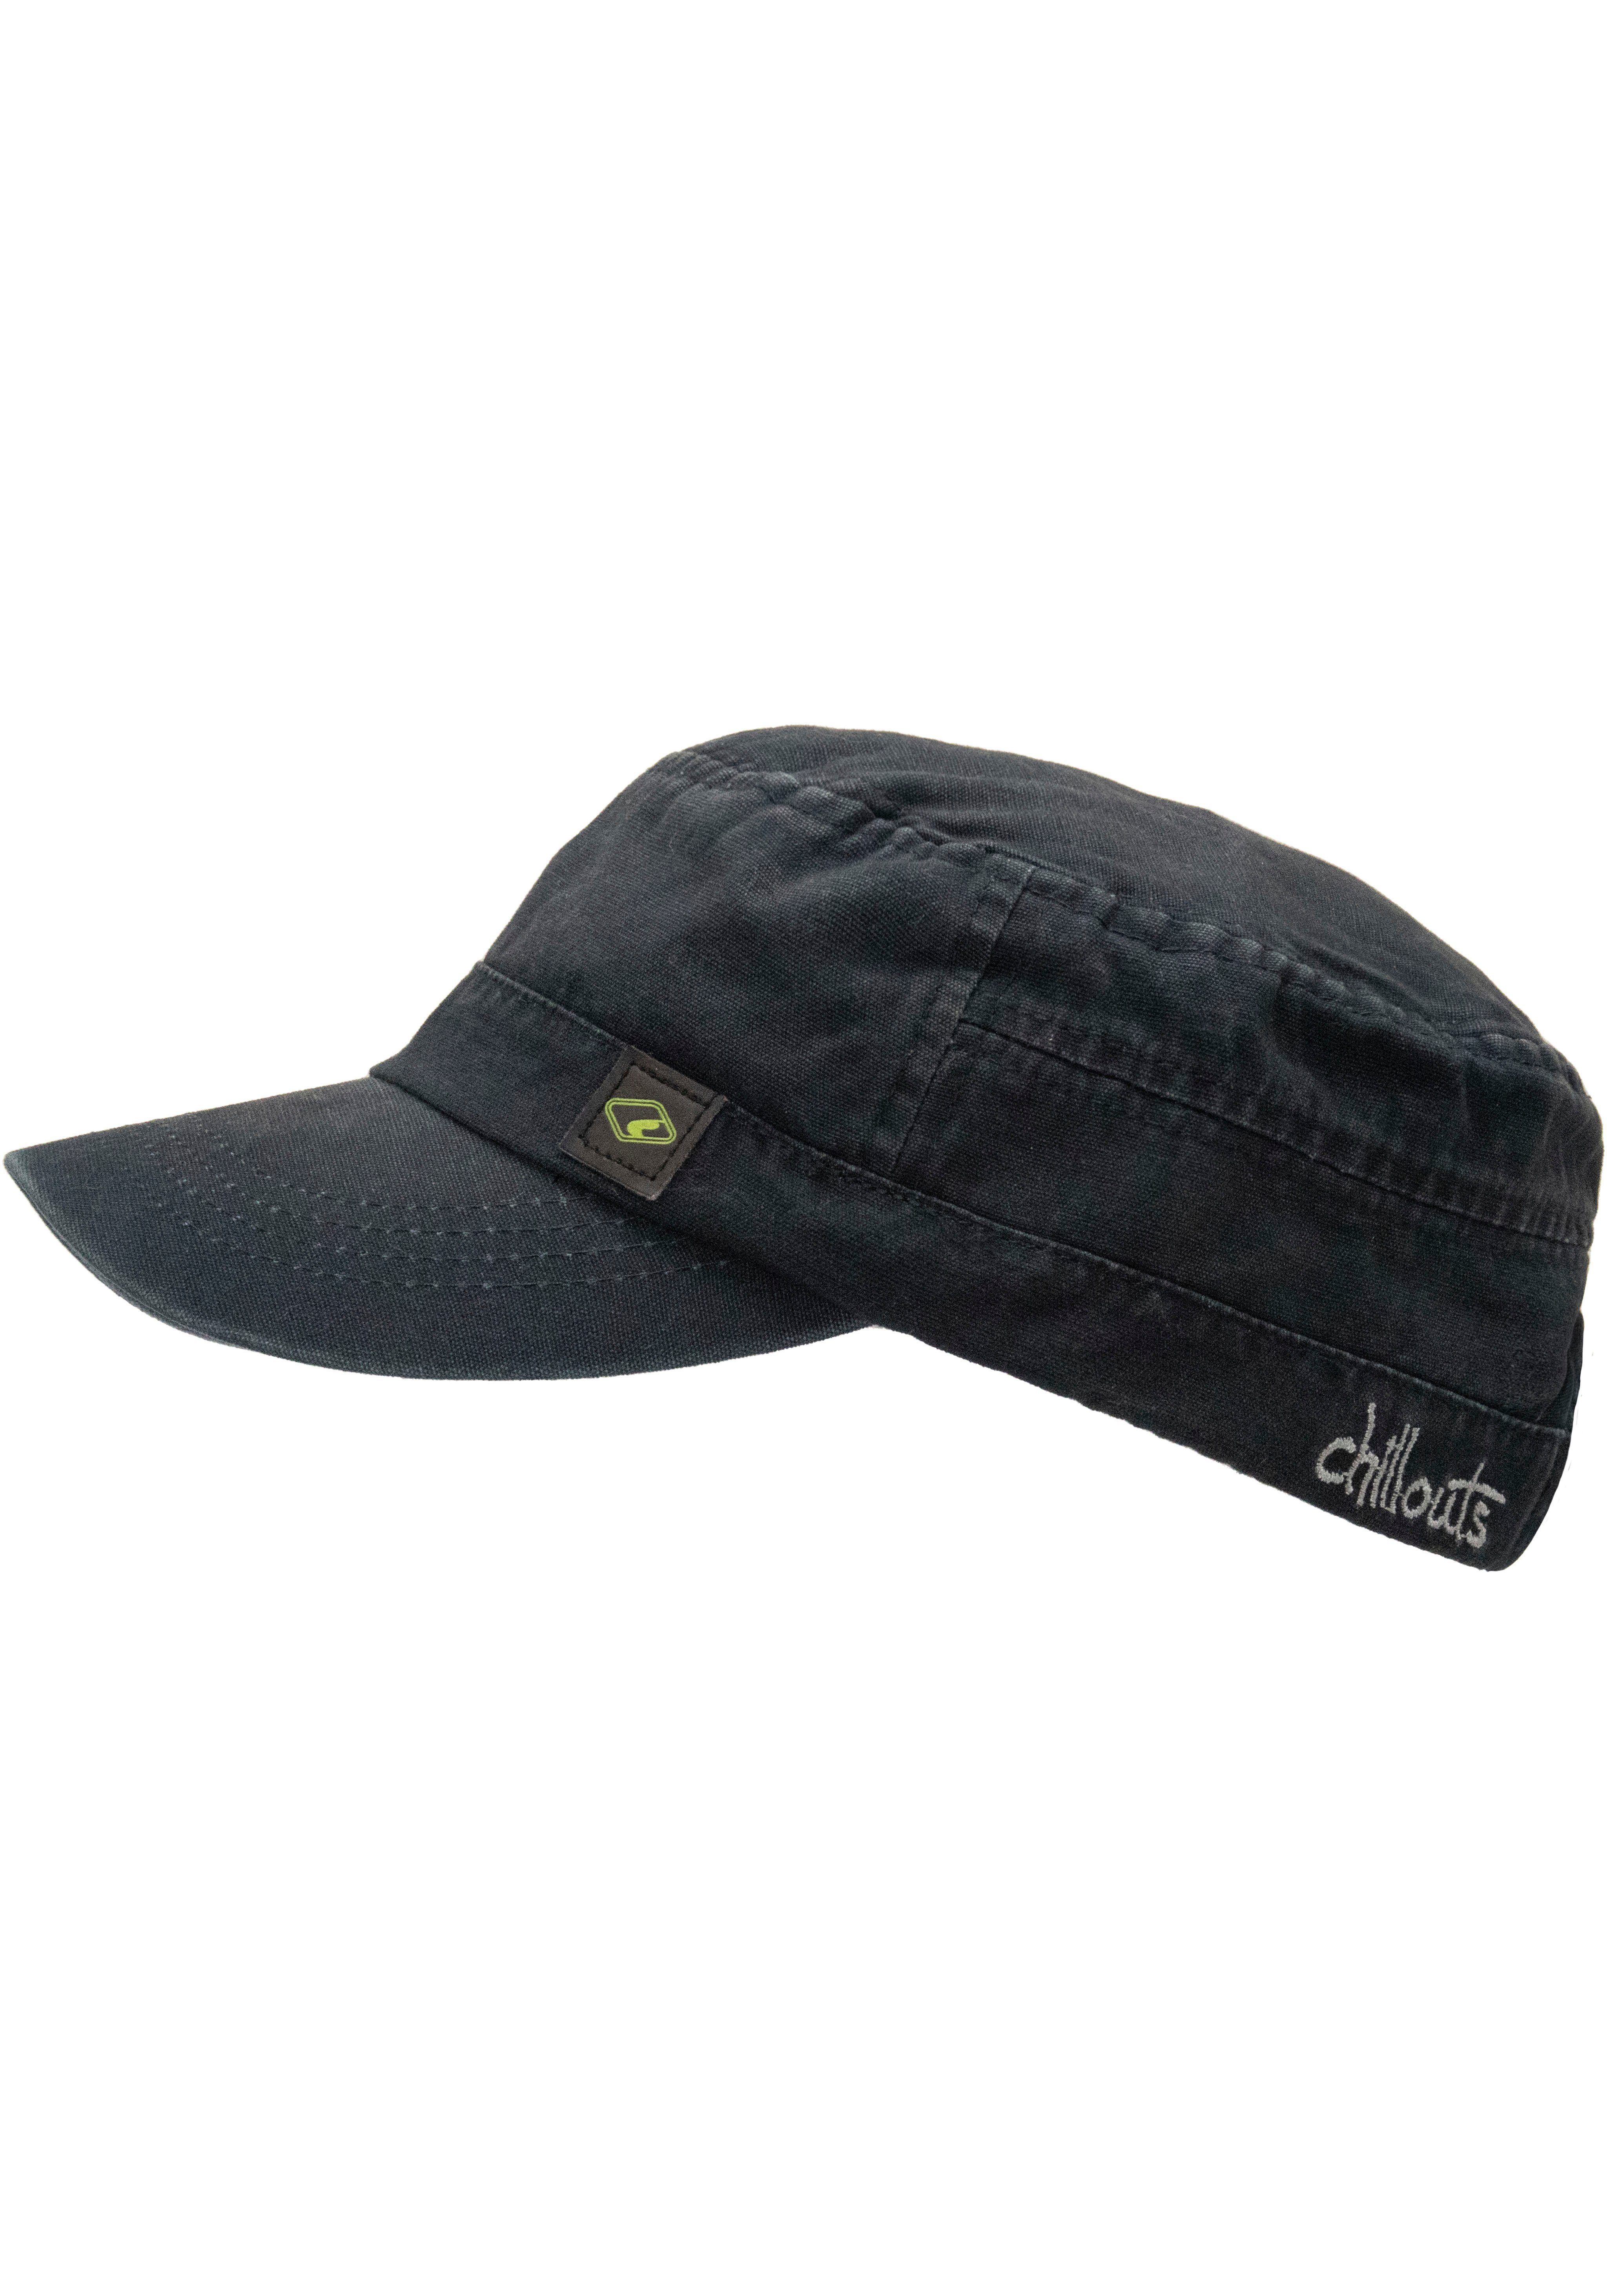 Baumwolle, Size Hat chillouts One El atmungsaktiv, navy washed reiner Army Cap aus Paso